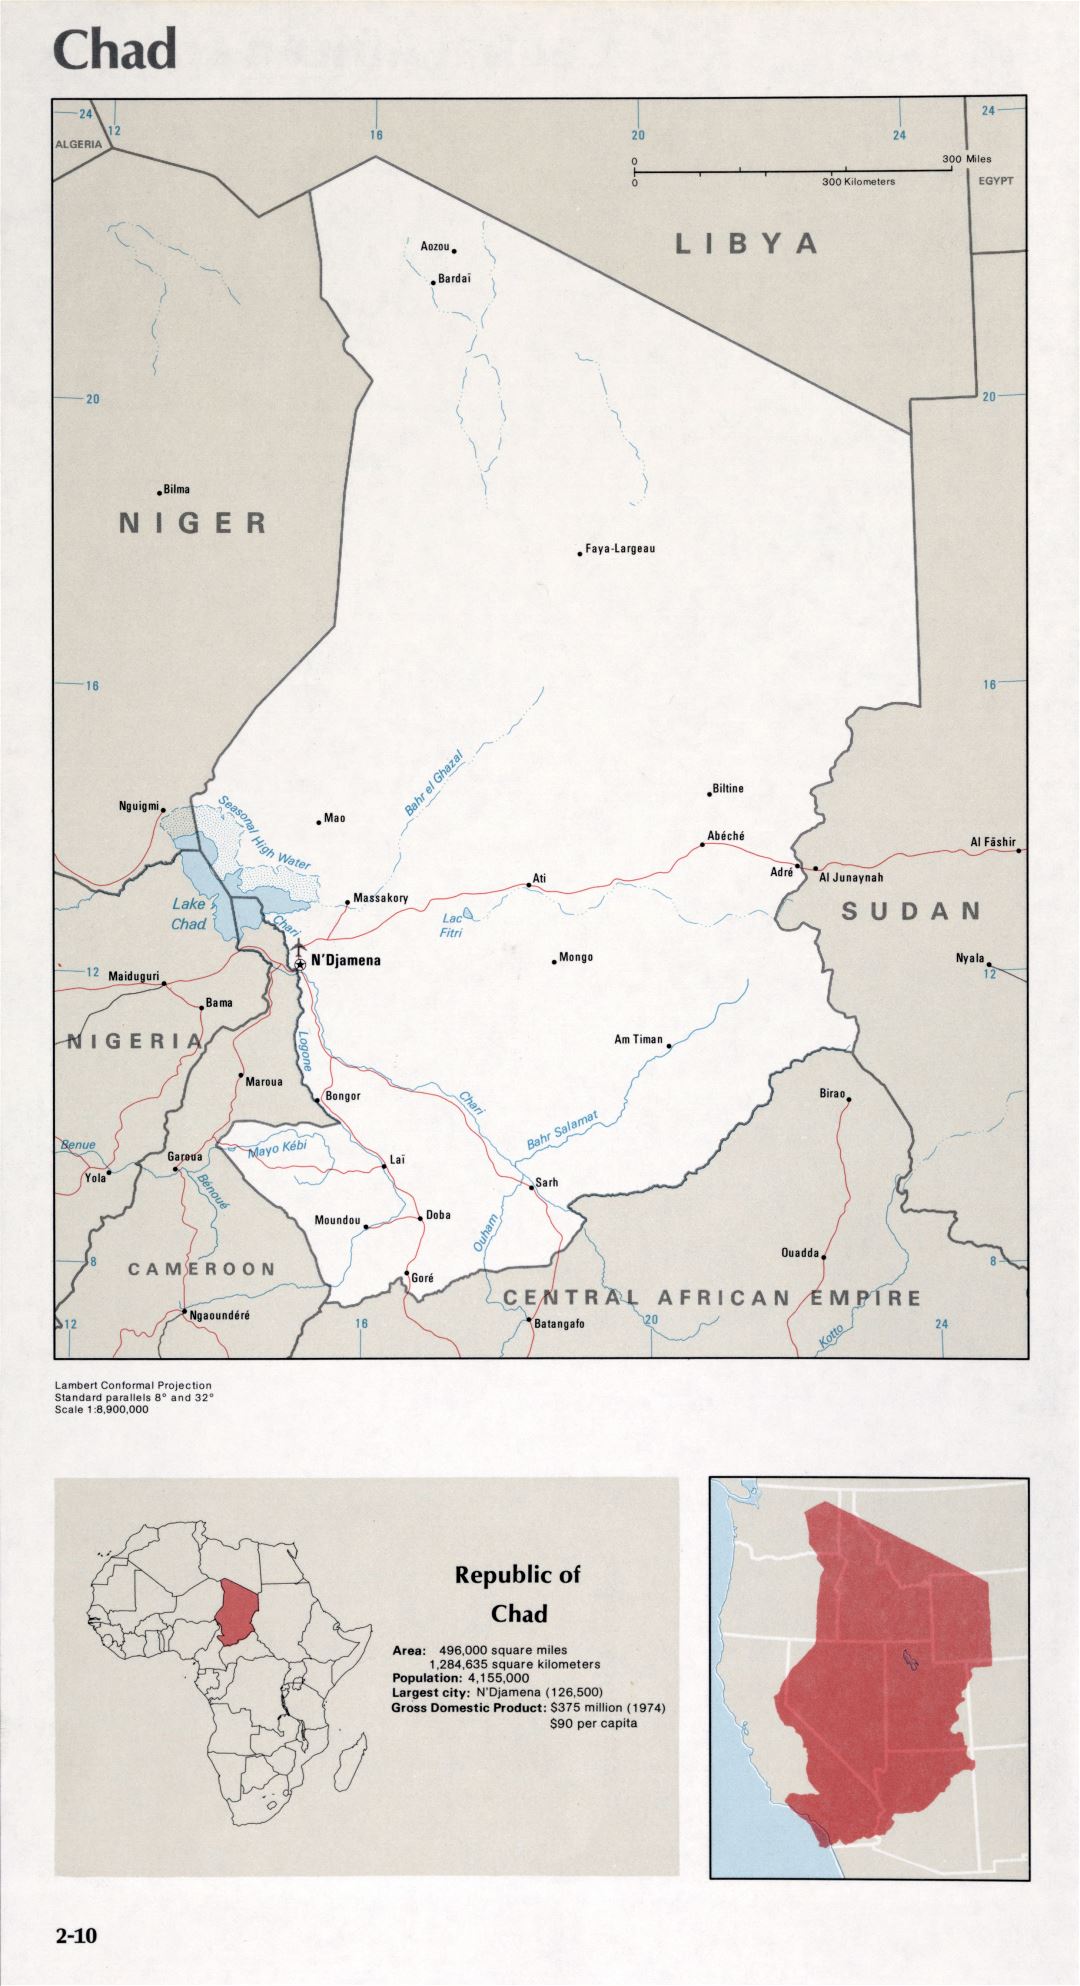 Map of Chad (2-10)